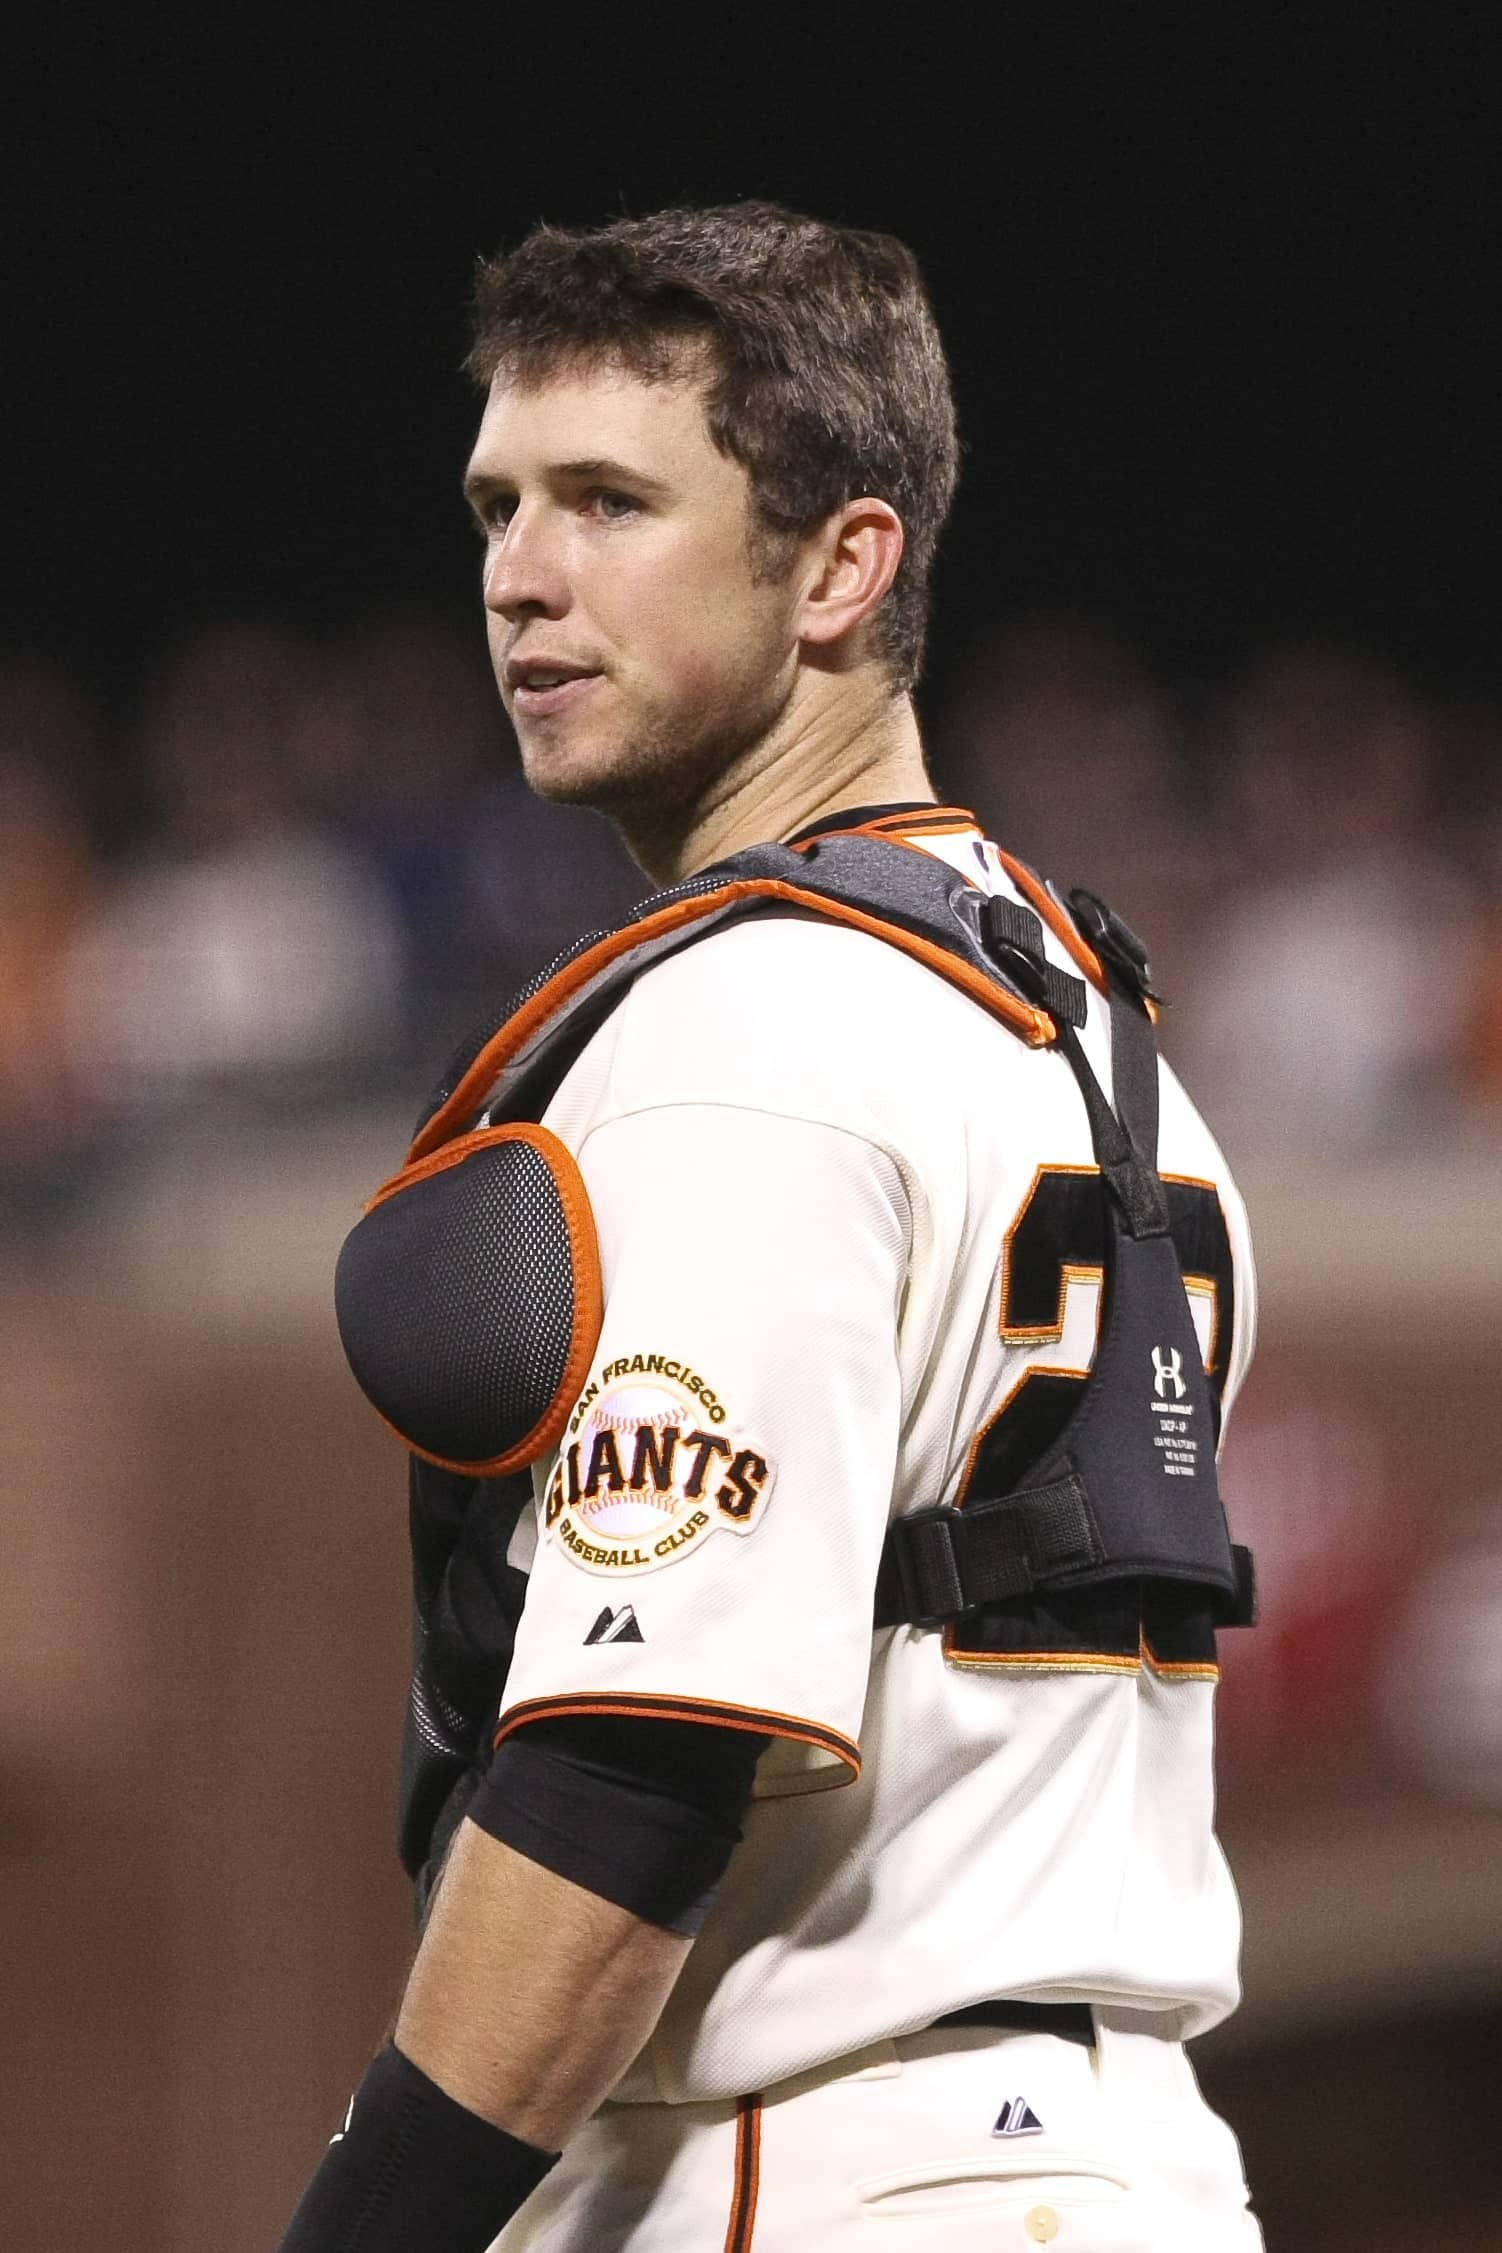 buster posey in catcher's gear